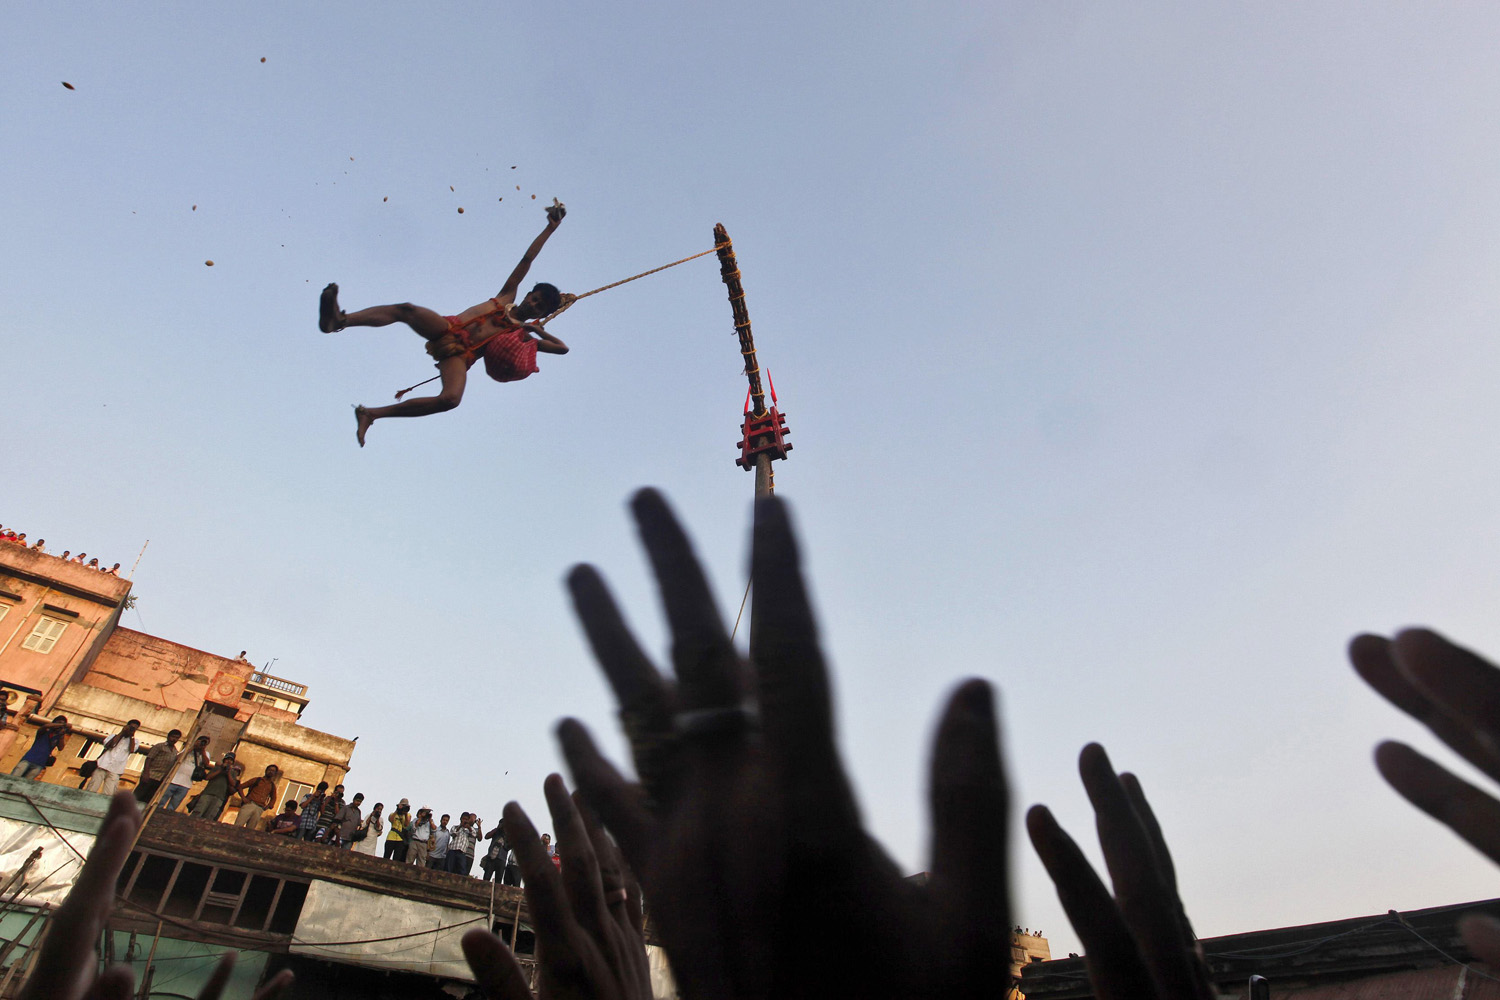 A Hindu devotee hanging from a rope throws offering towards other devotees during the "Chadak" ritual in Kolkata